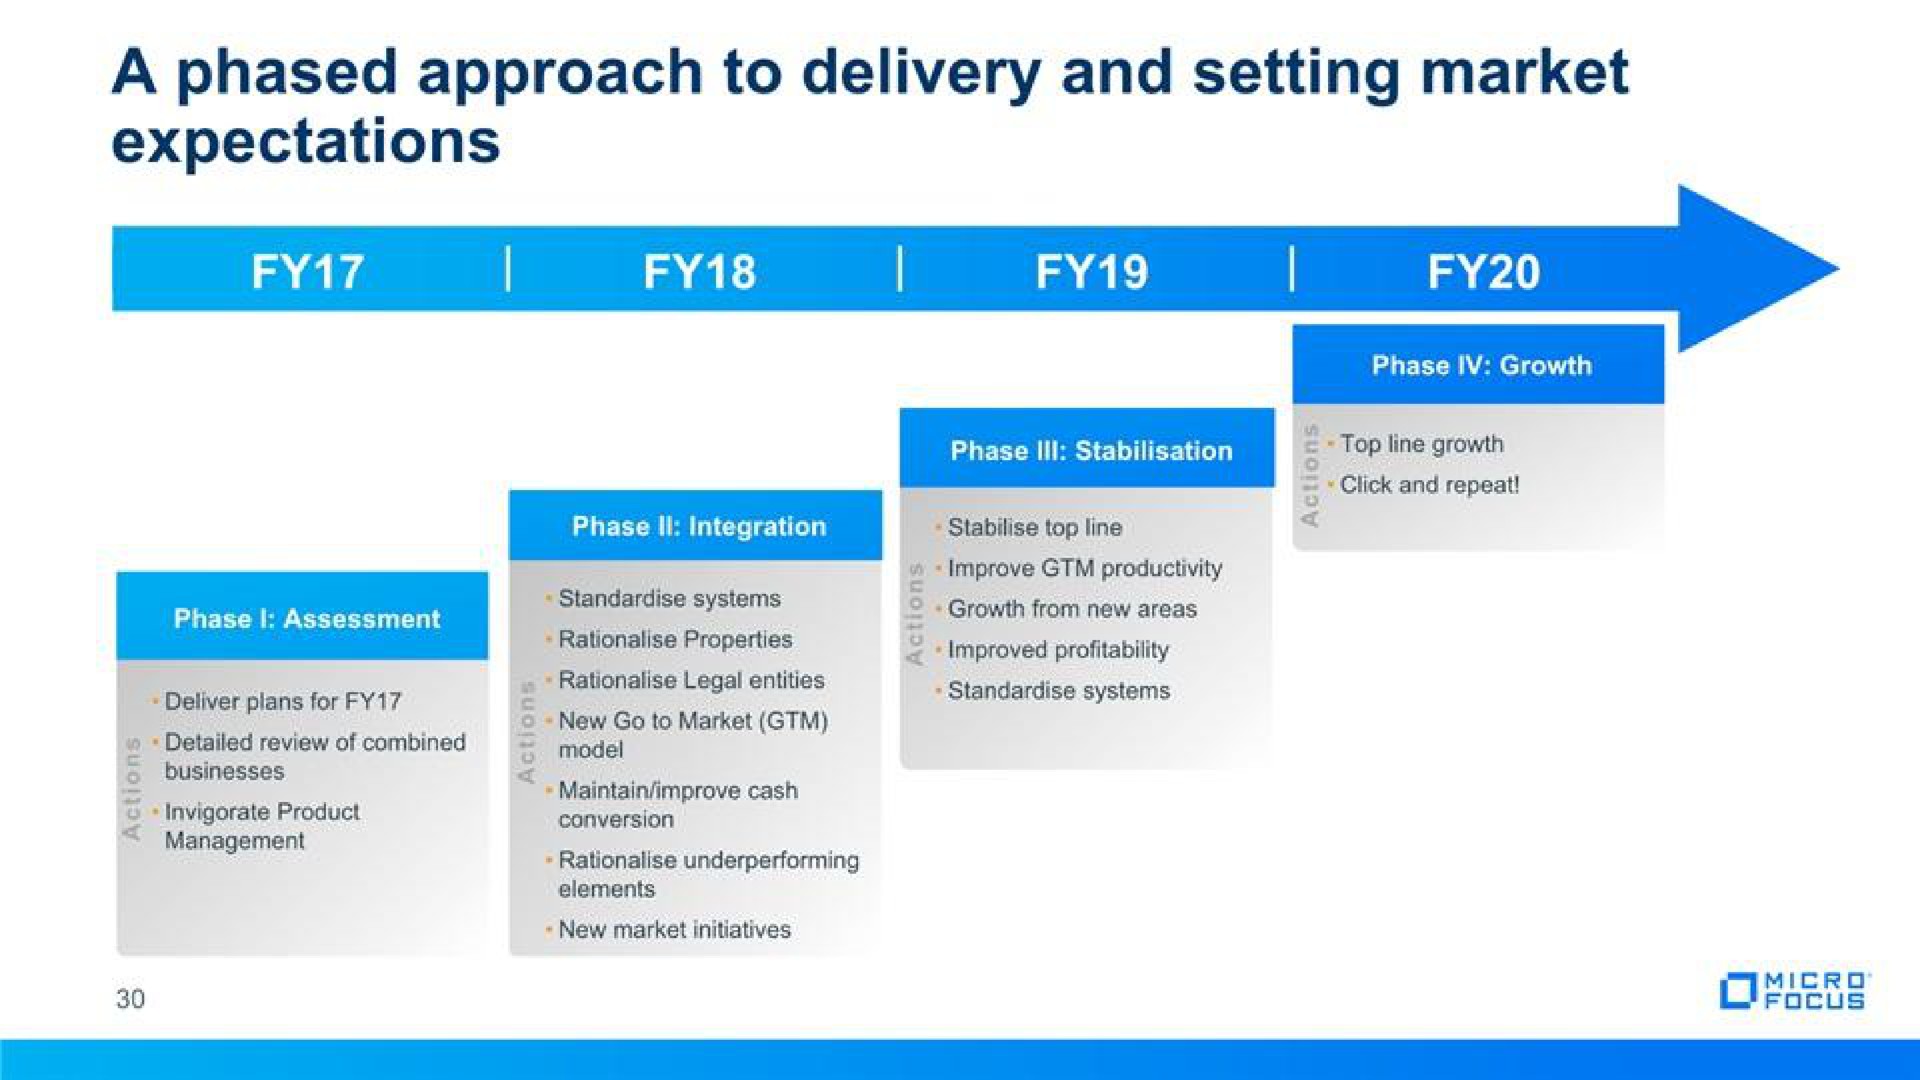 a phased approach to delivery and setting market expectations | Micro Focus